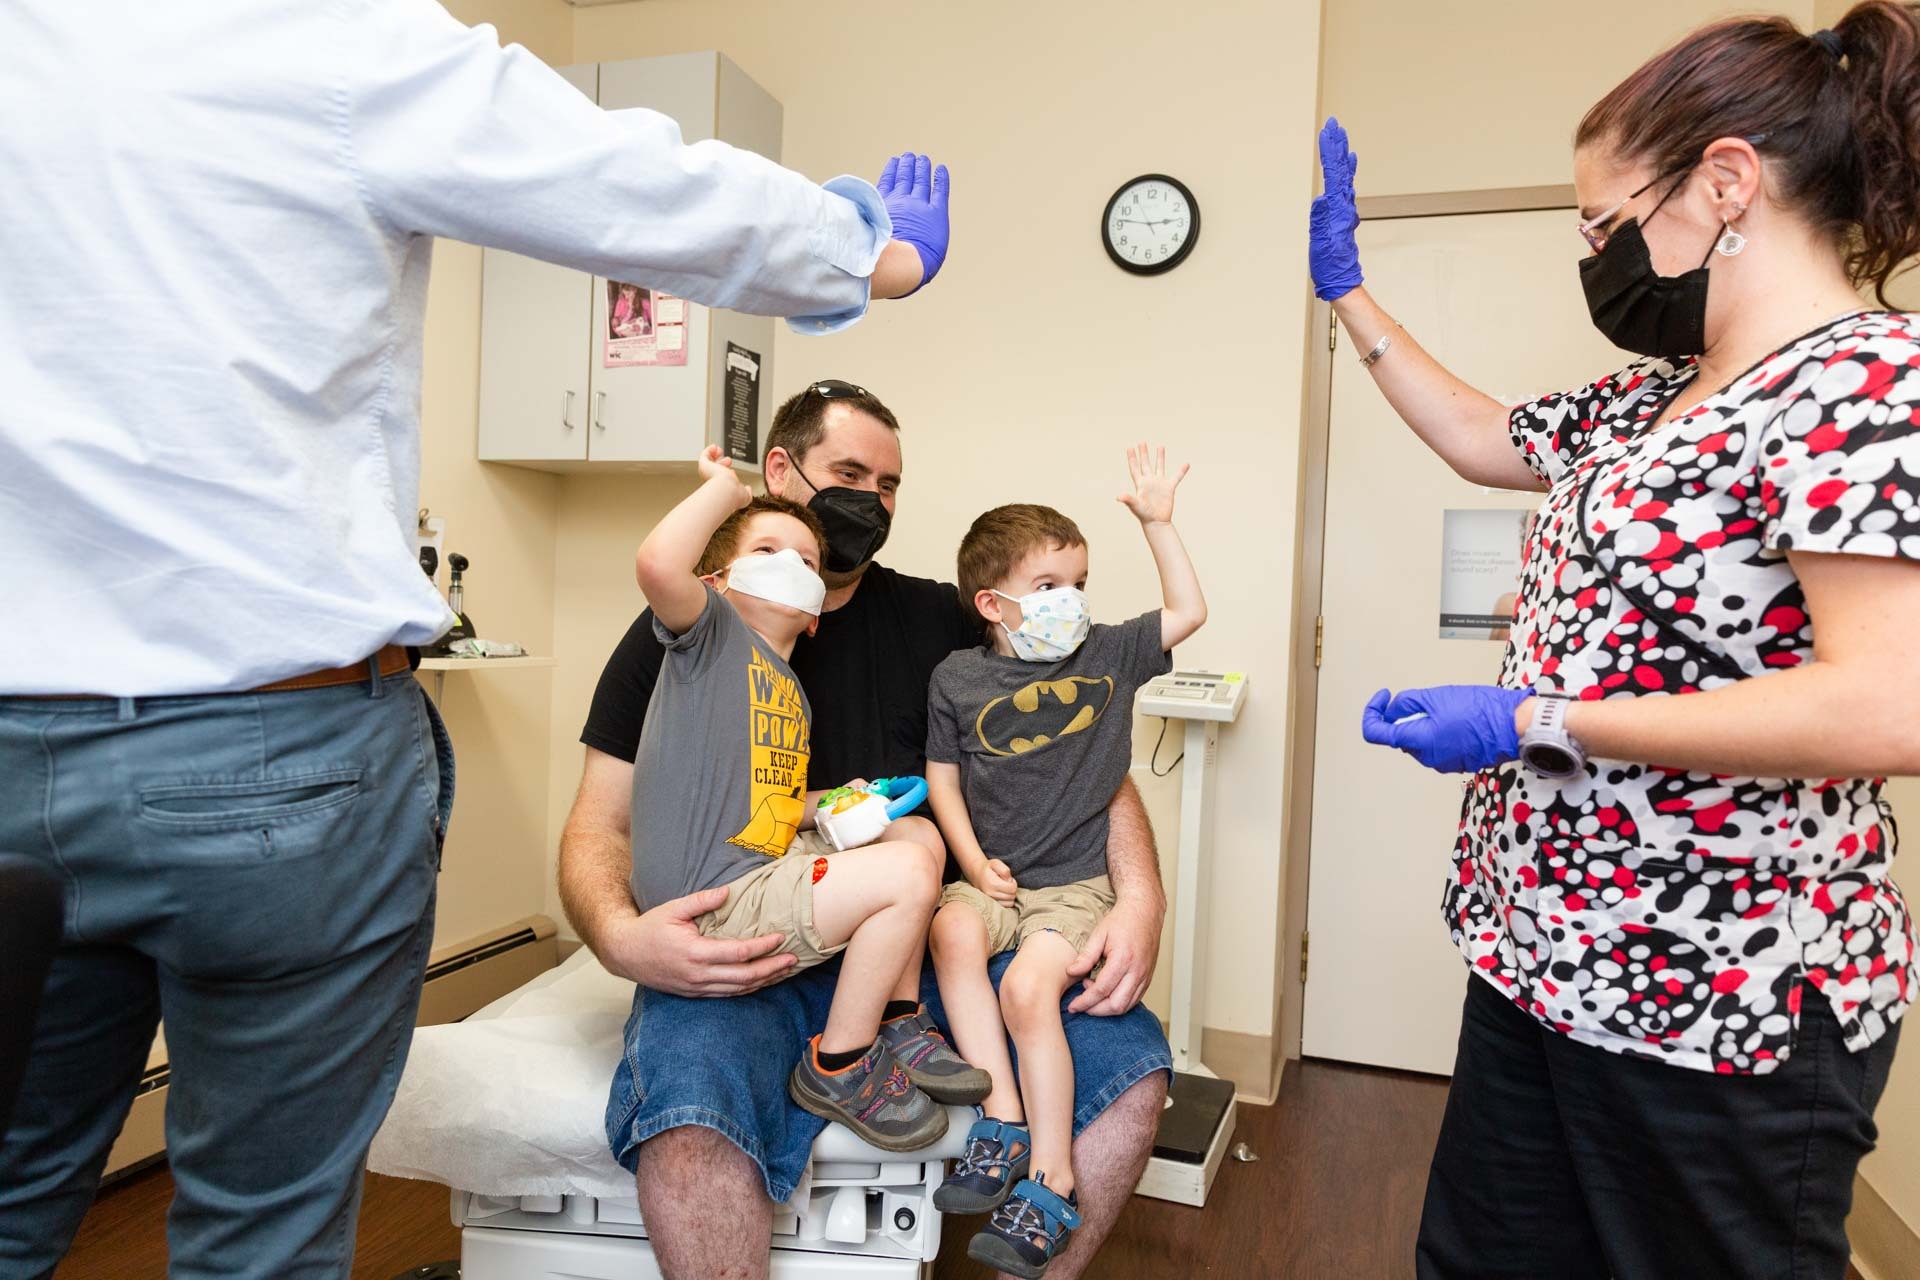 High fives from medical professionals to young patients